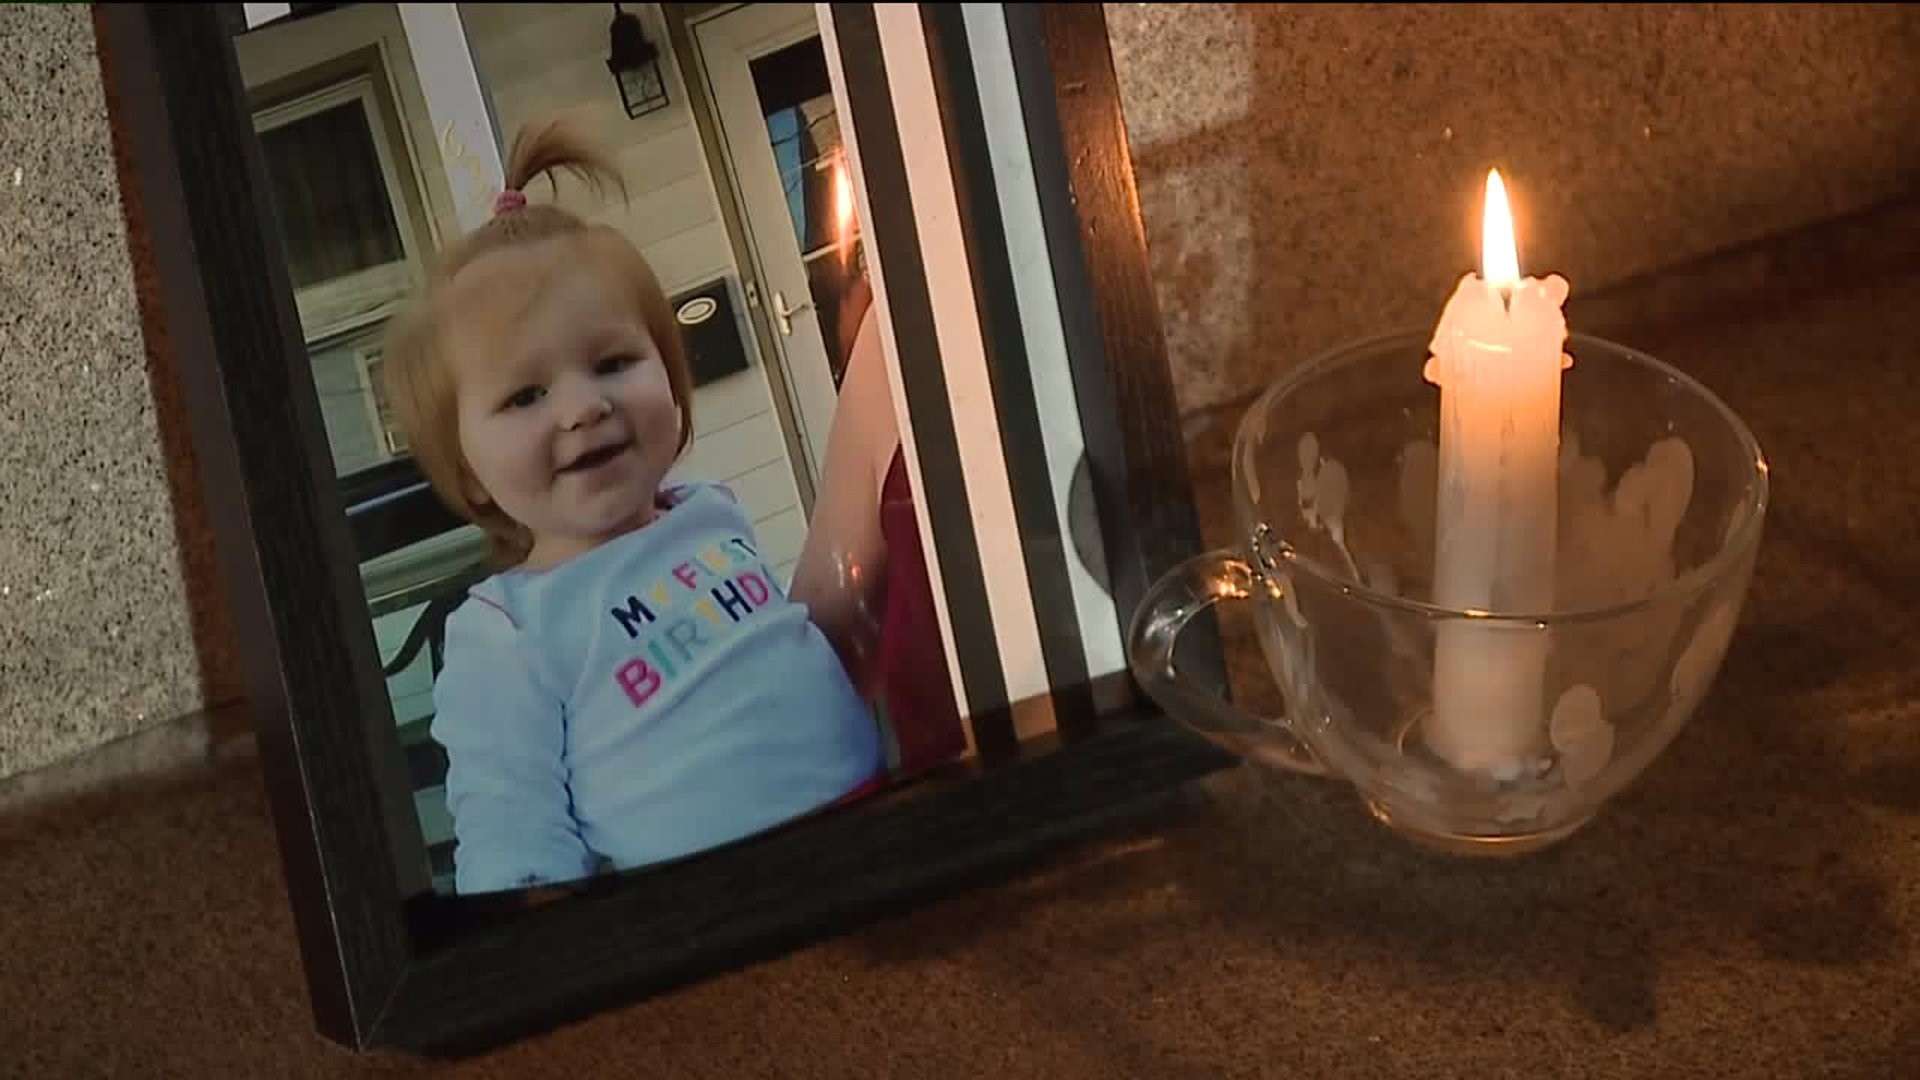 Candlelight Vigil Held to Send Prayers to 3-Year-Old as Family Prepares for Heartbreak